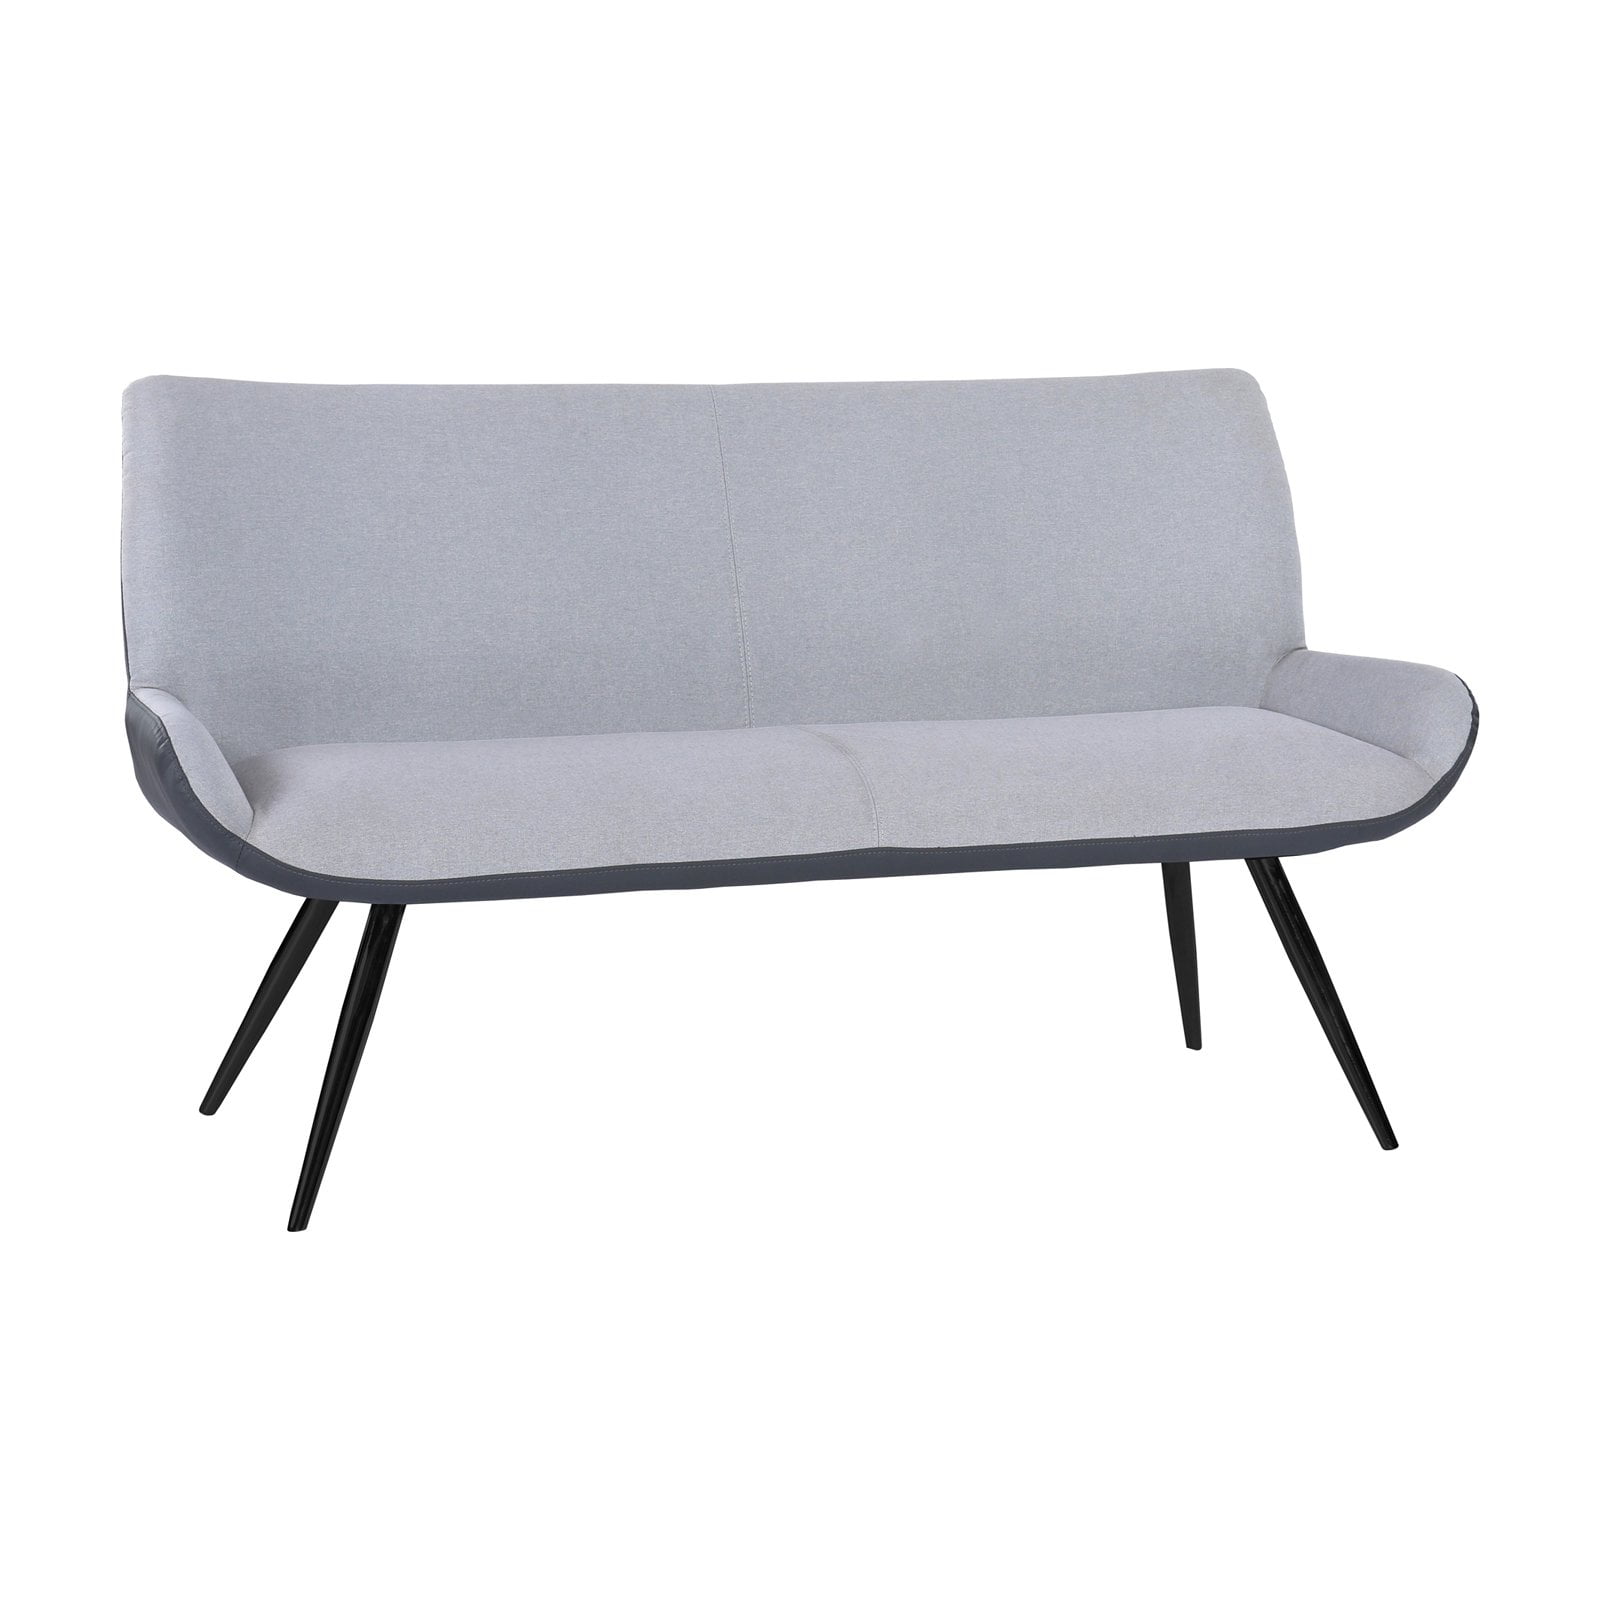 Picture of Armen Living LCCDBEBG 36 H x 62.5 W x 29 D Coronado Contemporary Bench in Brushed Gray Powder Coated Finish & Gray Fabric